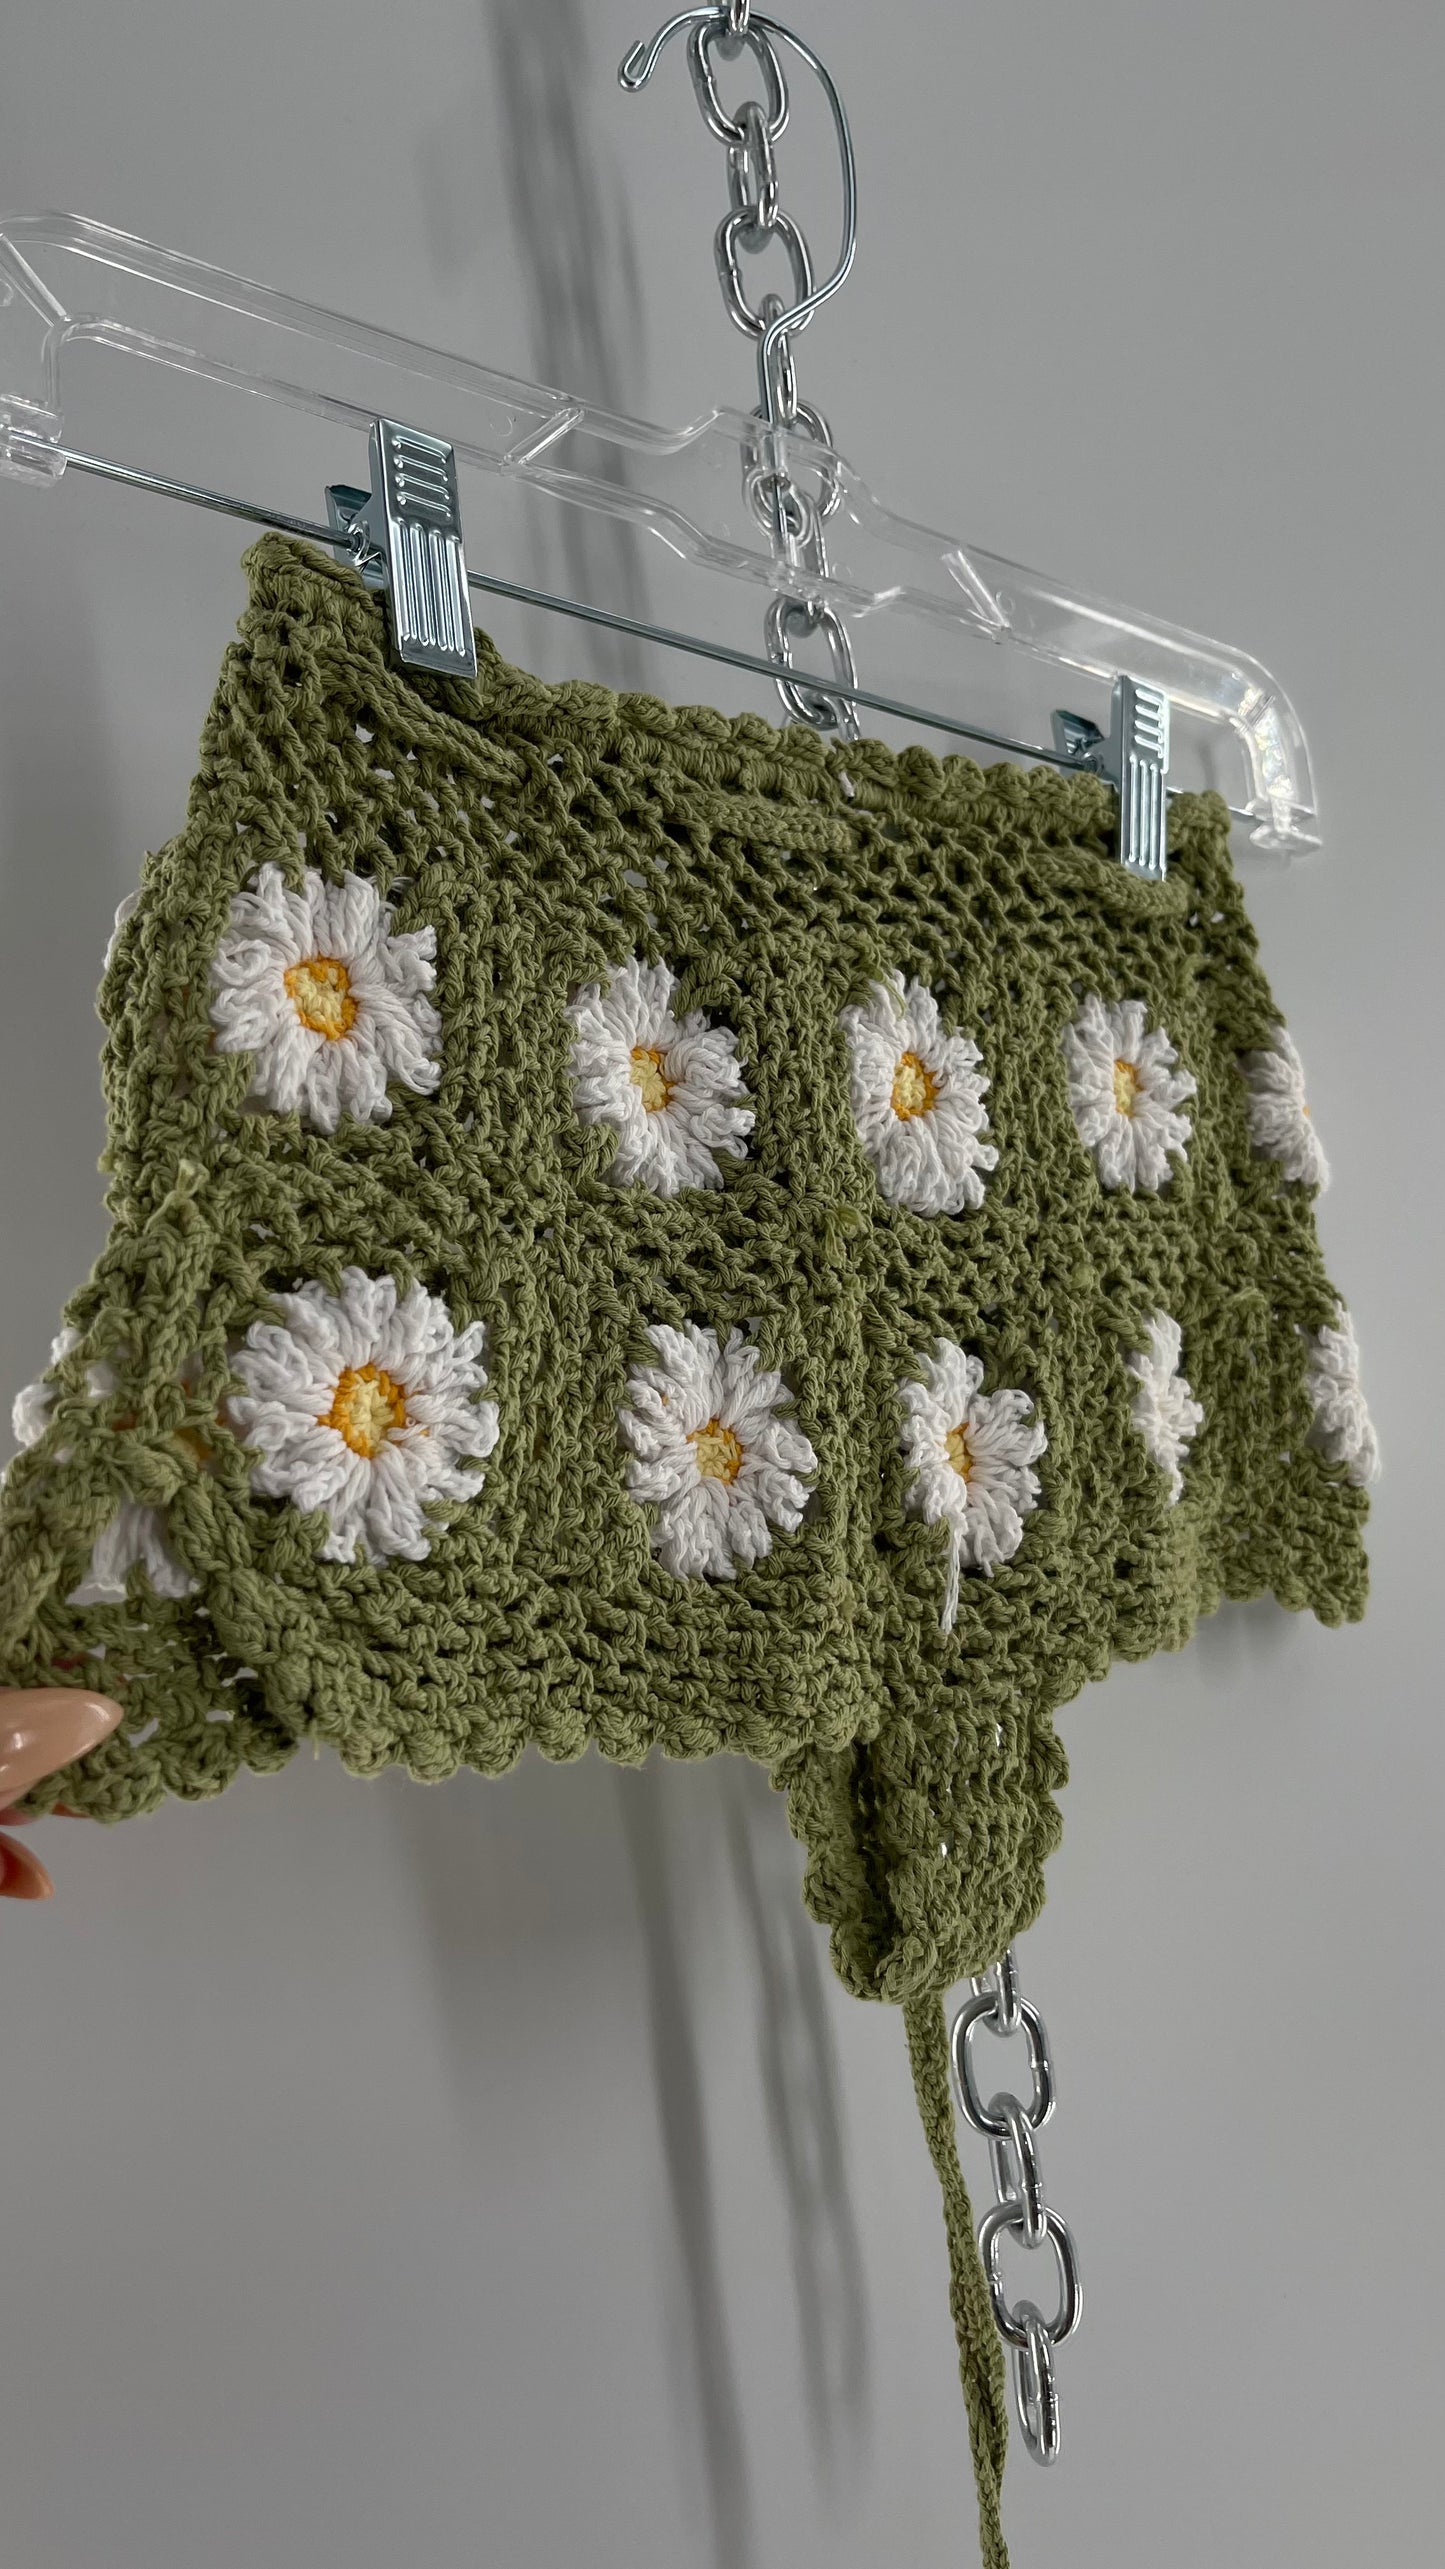 AndiBagus Hand Made Crochet Daisy Fields High Waisted Shorts/Cover Up (XS/S)